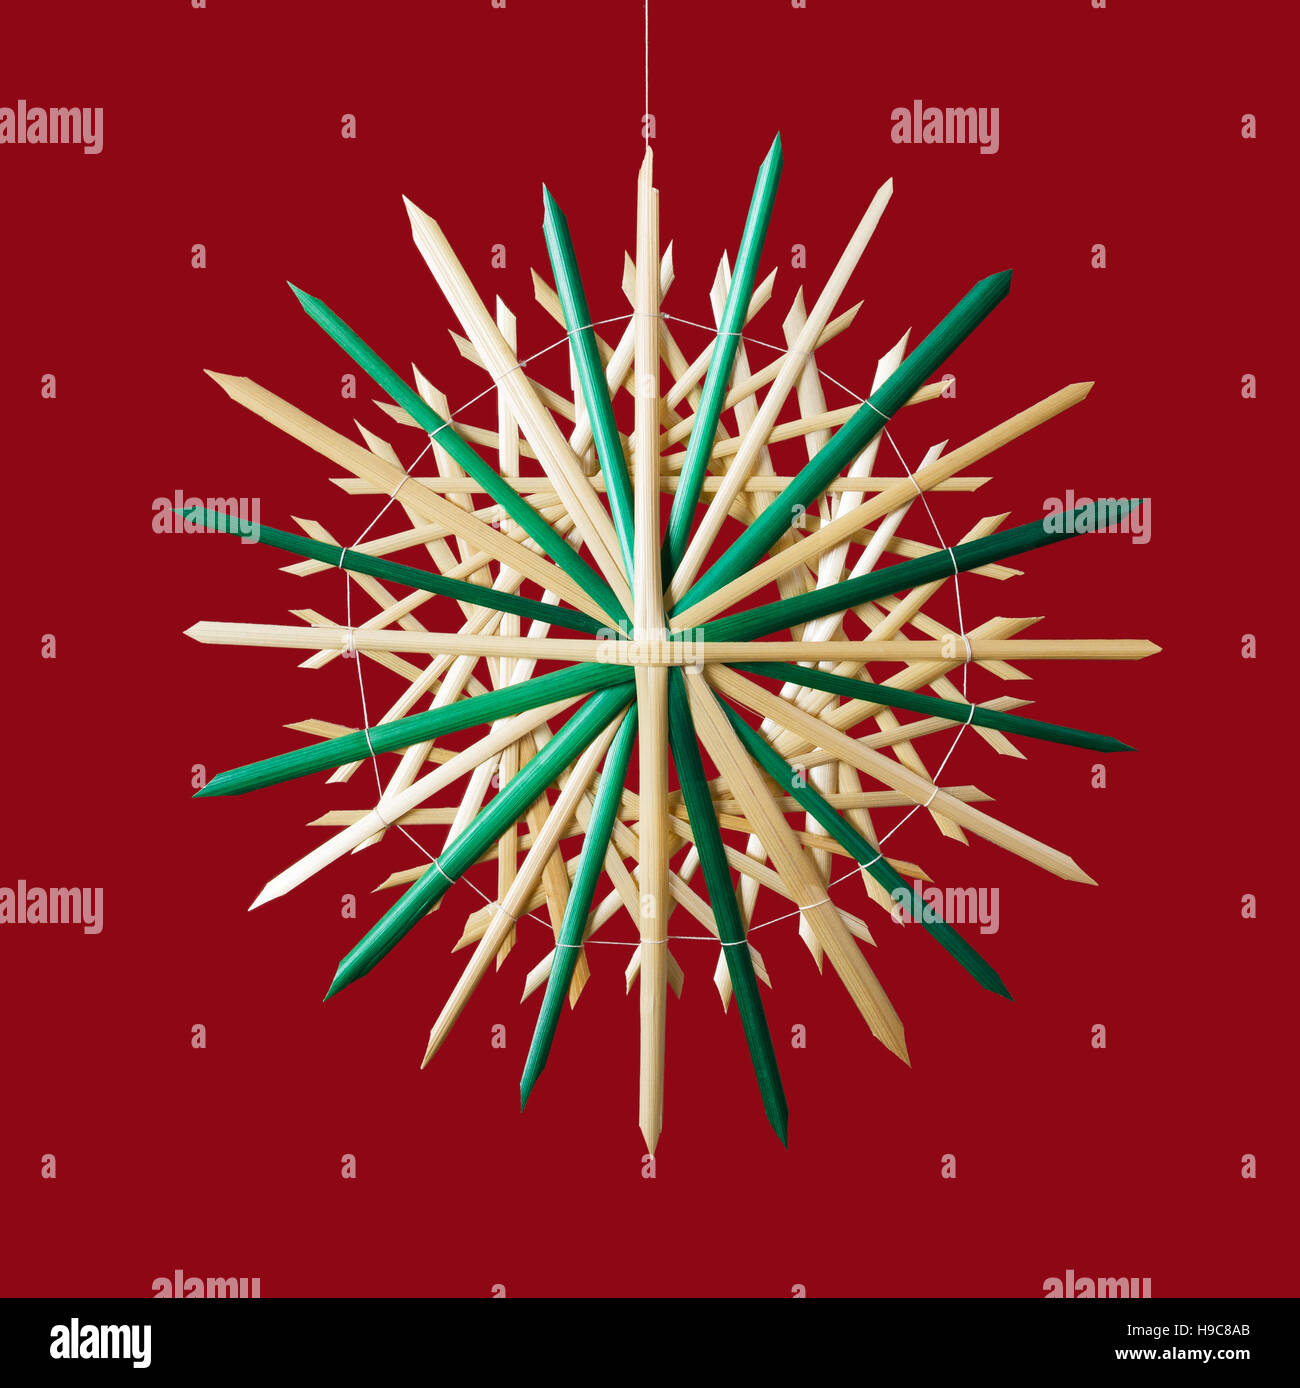 Straw star Christmas decoration on red background. Handmade colorful decor for windows, as gifts or to hang on the xmas tree. Stock Photo